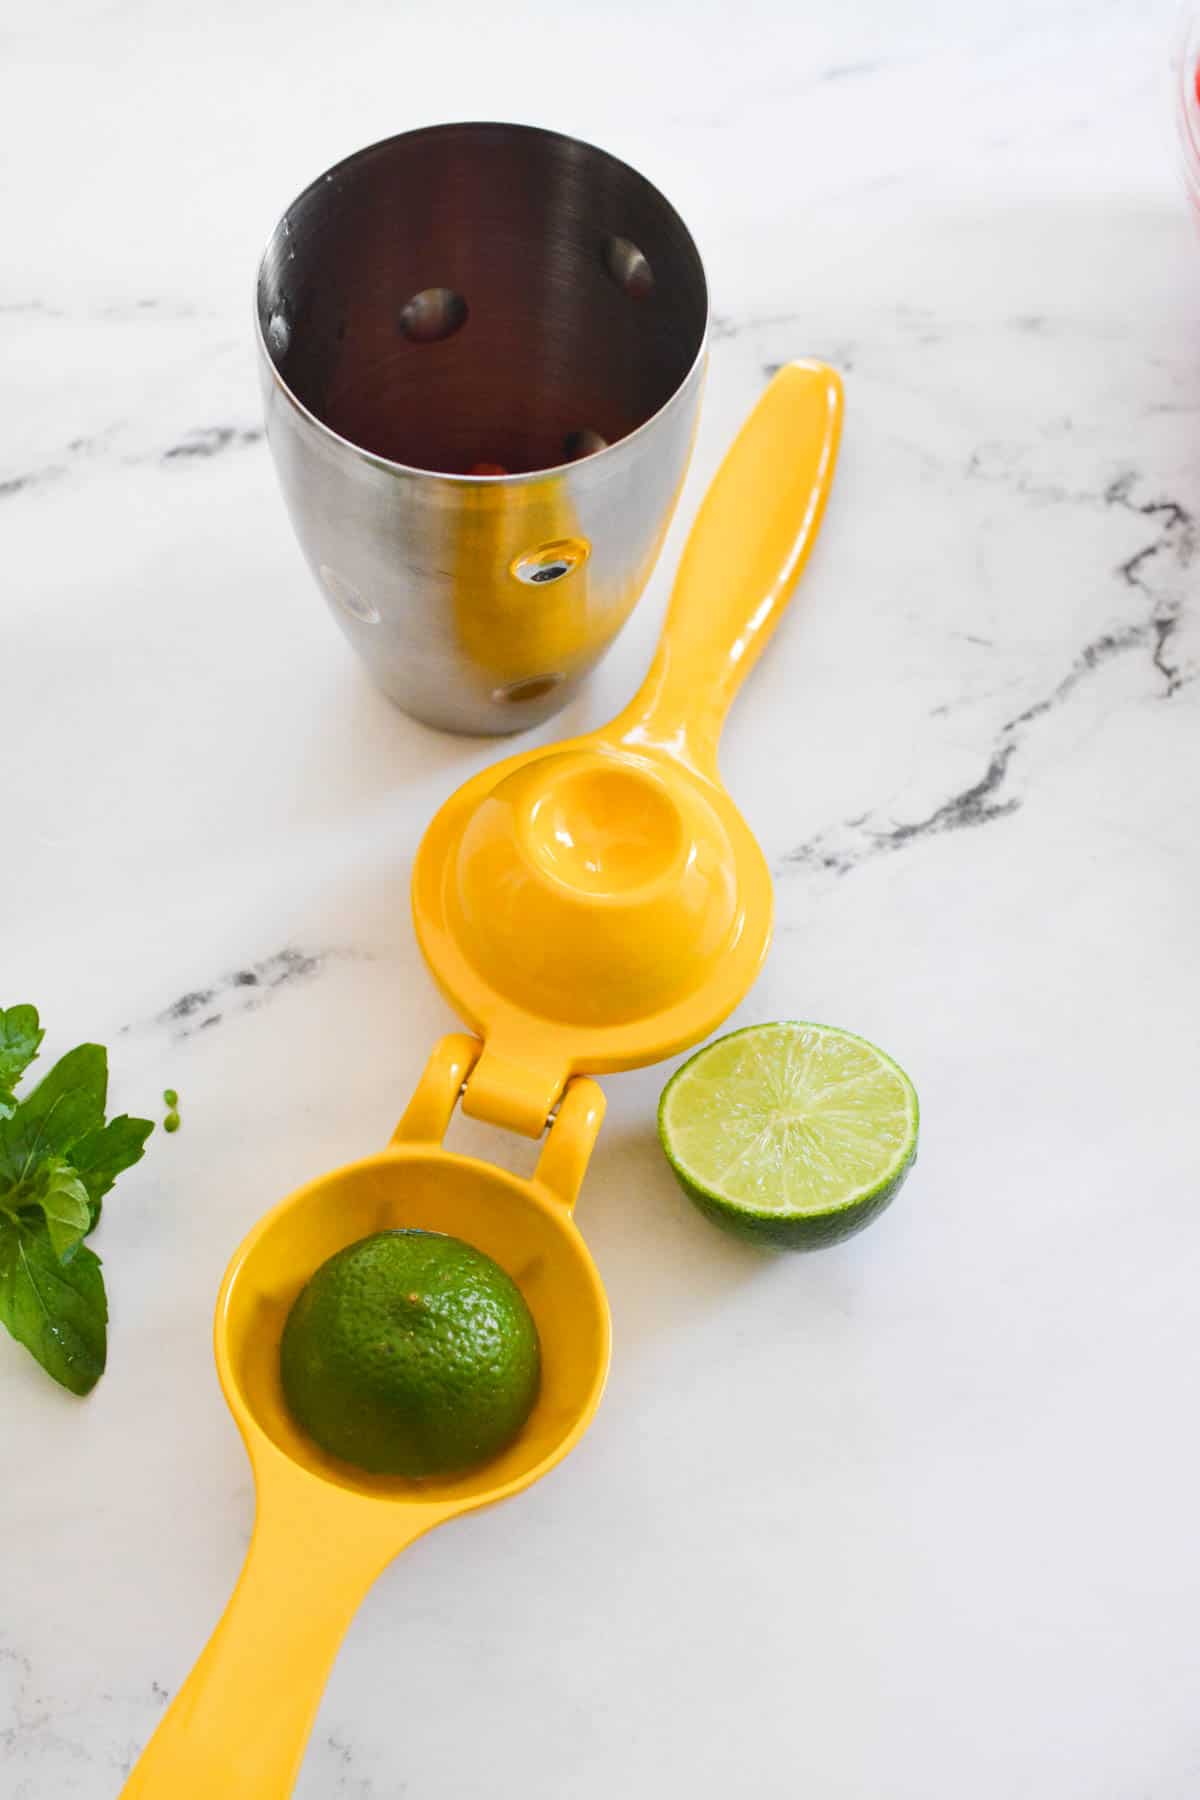 Yellow citrus squeezer with half a lime in it on the counter next to a cocktail shaker.